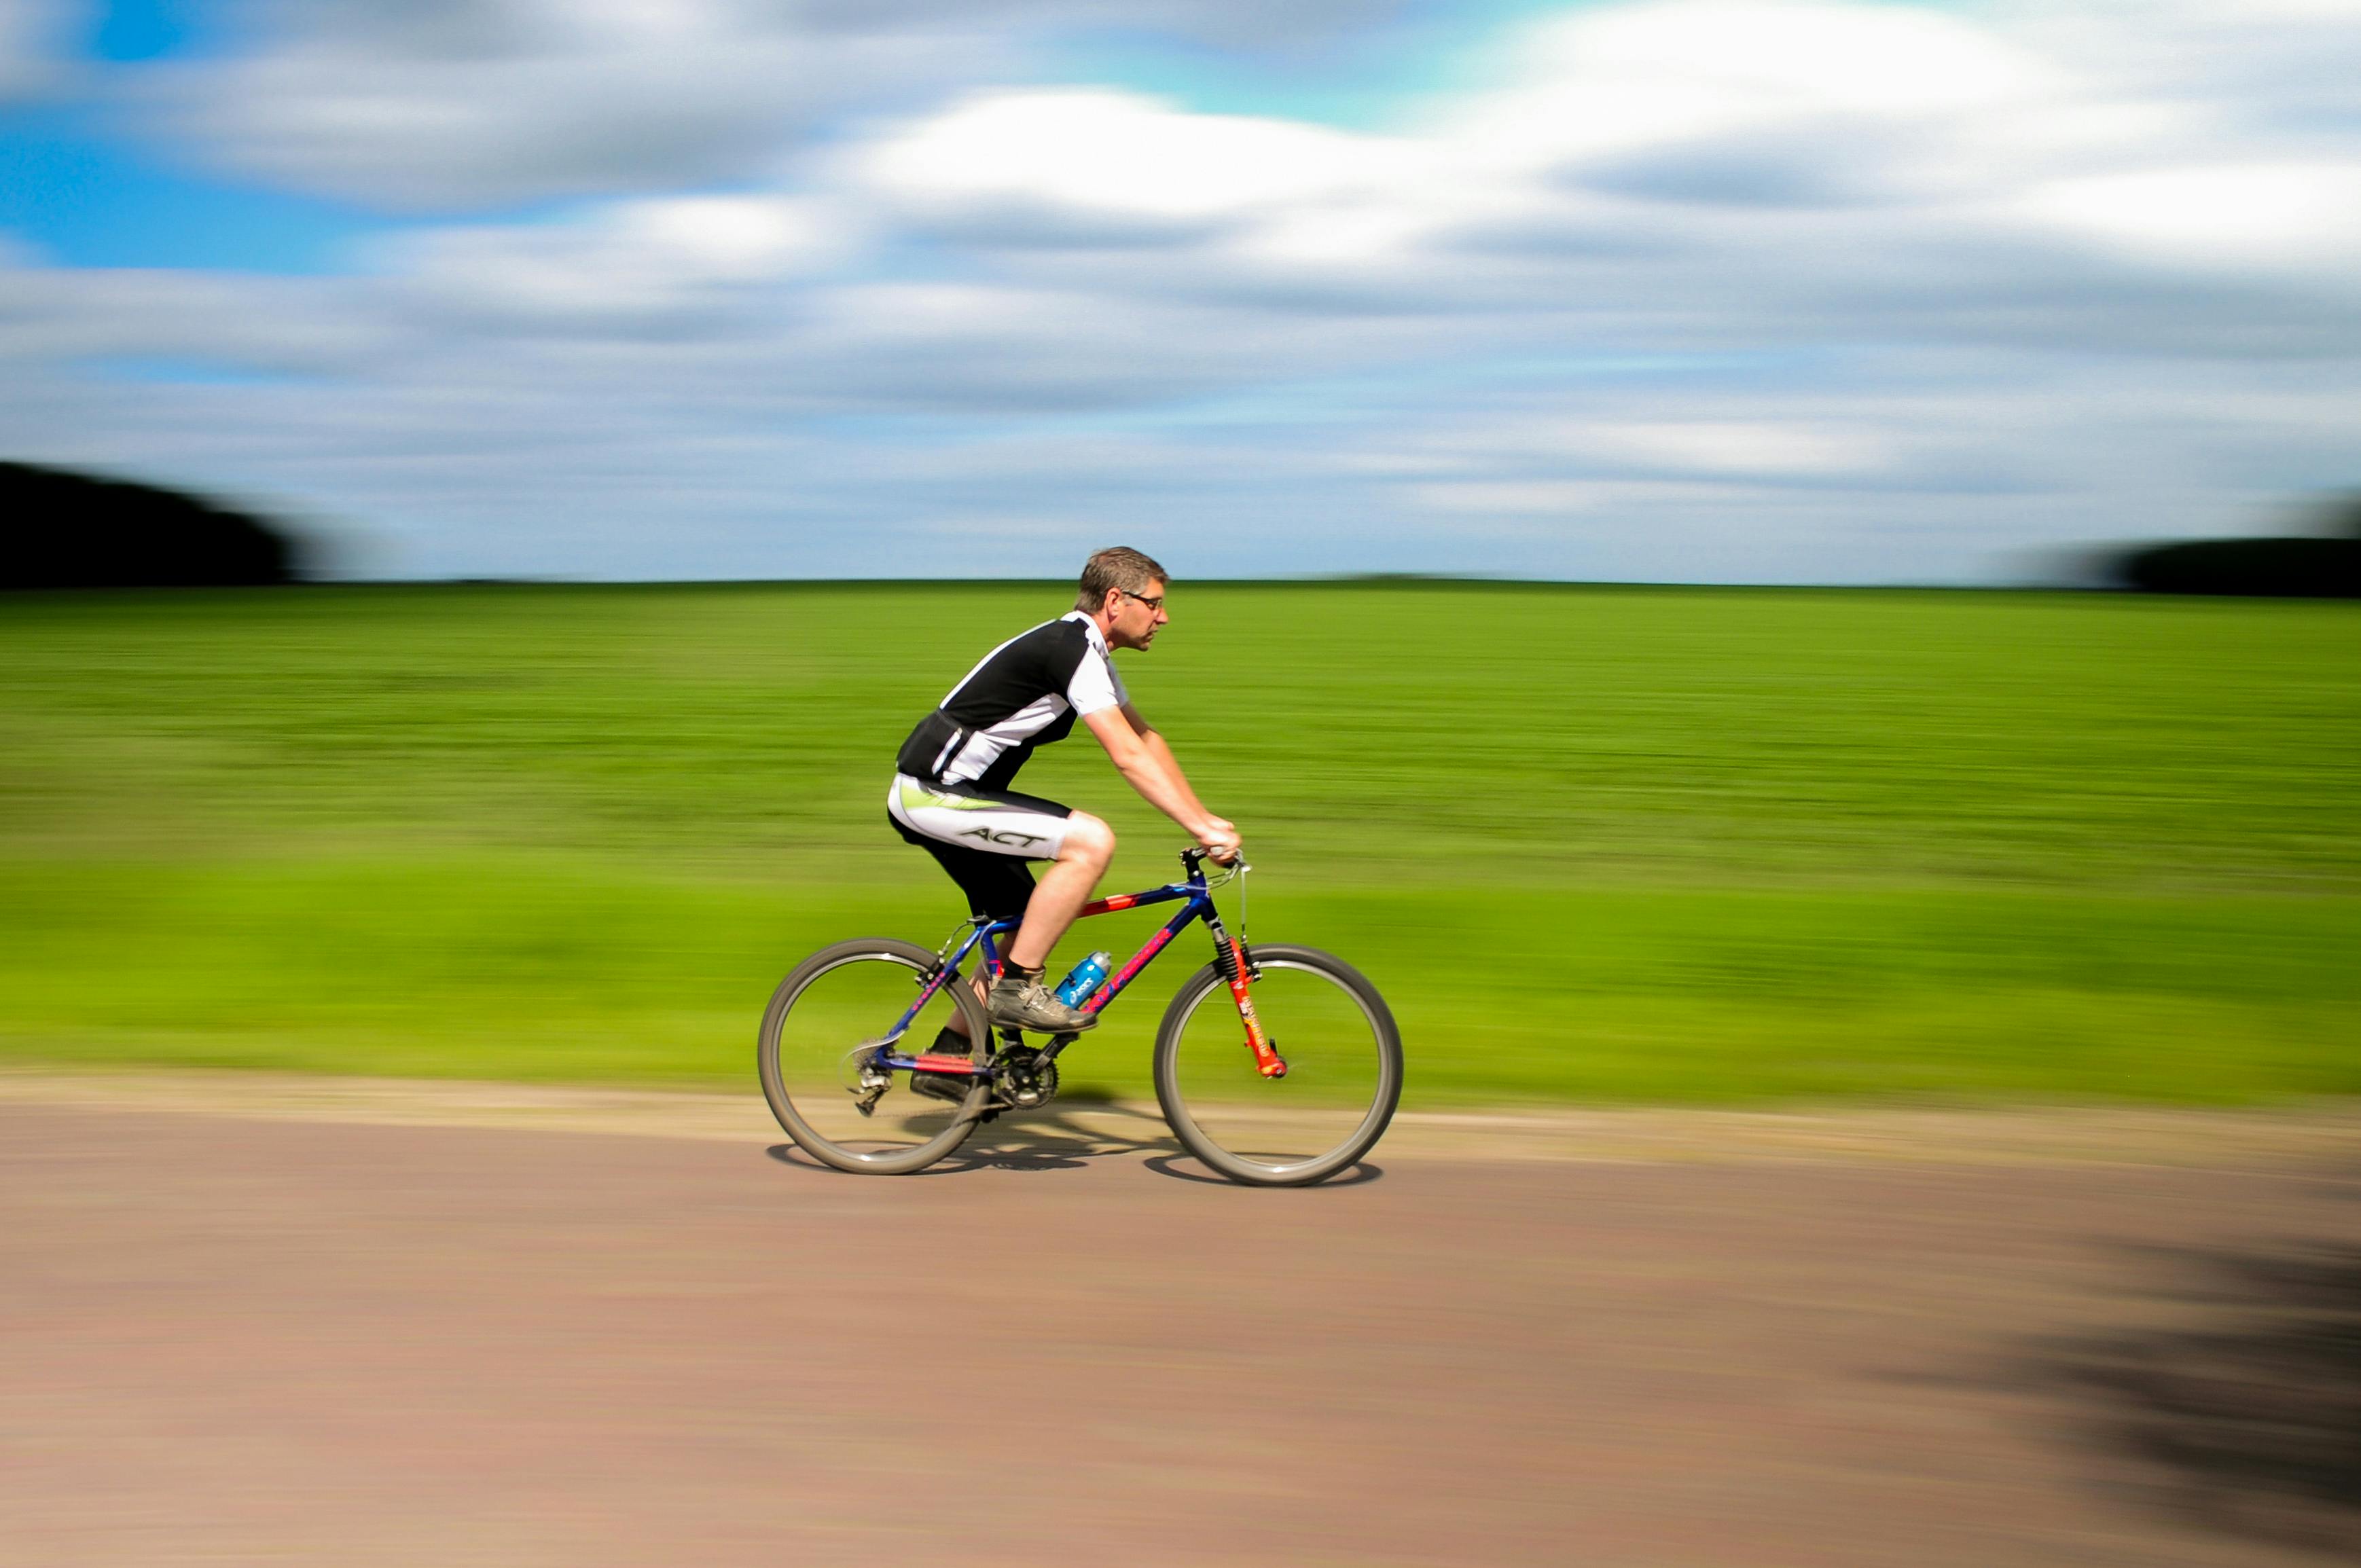 Free stock photo of bicycle, bicyclist, bike - Person Sport Bike Bicycle